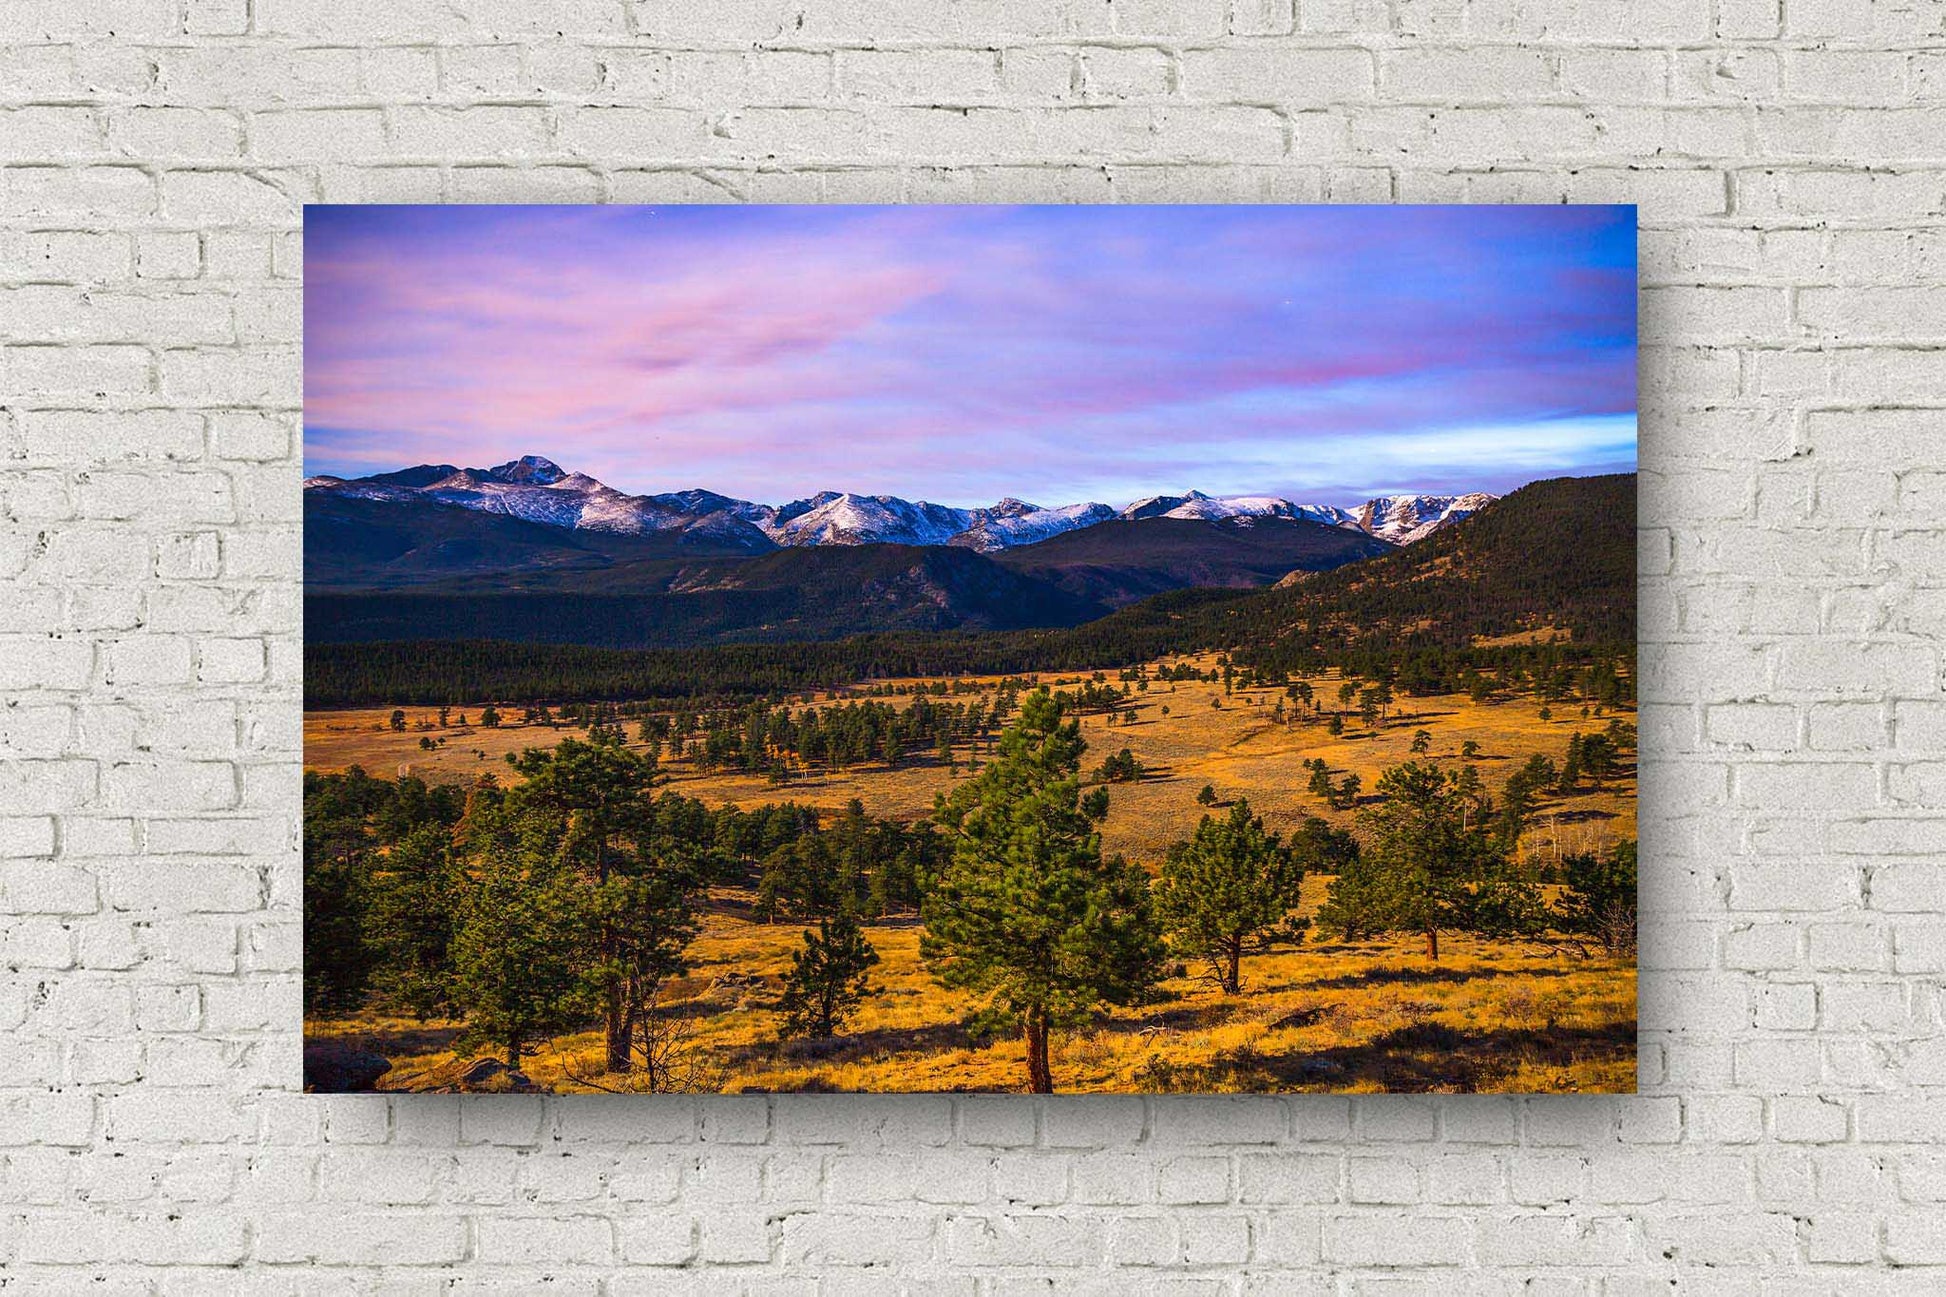 Rocky Mountain metal print wall art on aluminum of snow-capped peaks overlooking a mountain valley at dusk near Estes Park, Colorado by Sean Ramsey of Southern Plains Photography.